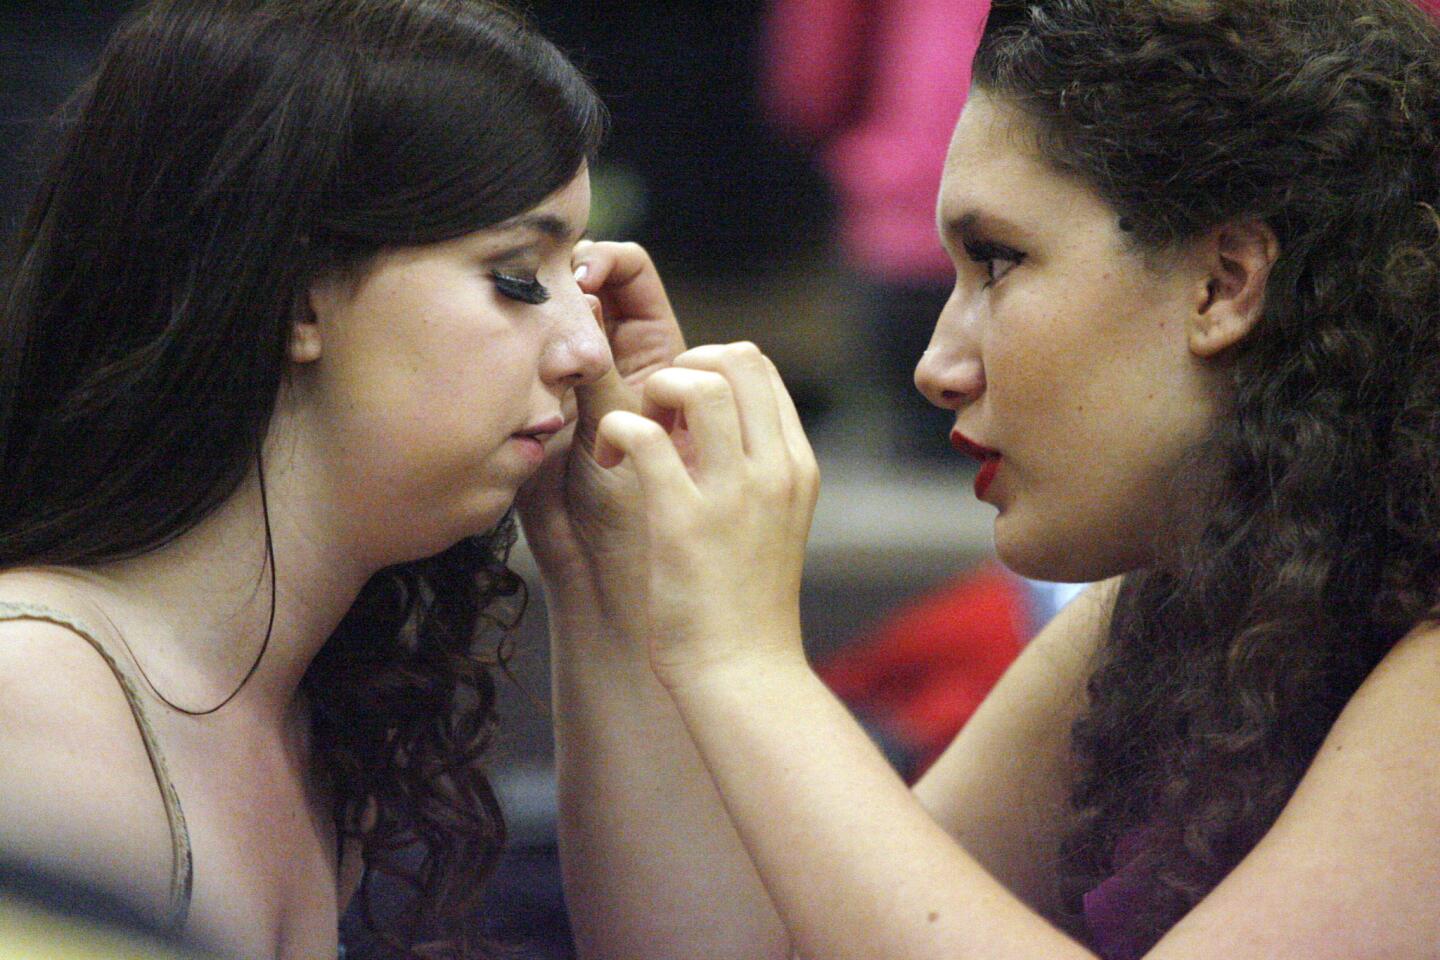 Elle Willgues, left gets her eyelashes done by Bronwen Capshaw before their John Burroughs High School Vocal Music Assn. performance, "Burroughs on Broadway," which took place at John Burroughs High School in Burbank on Friday, October 12, 2012.